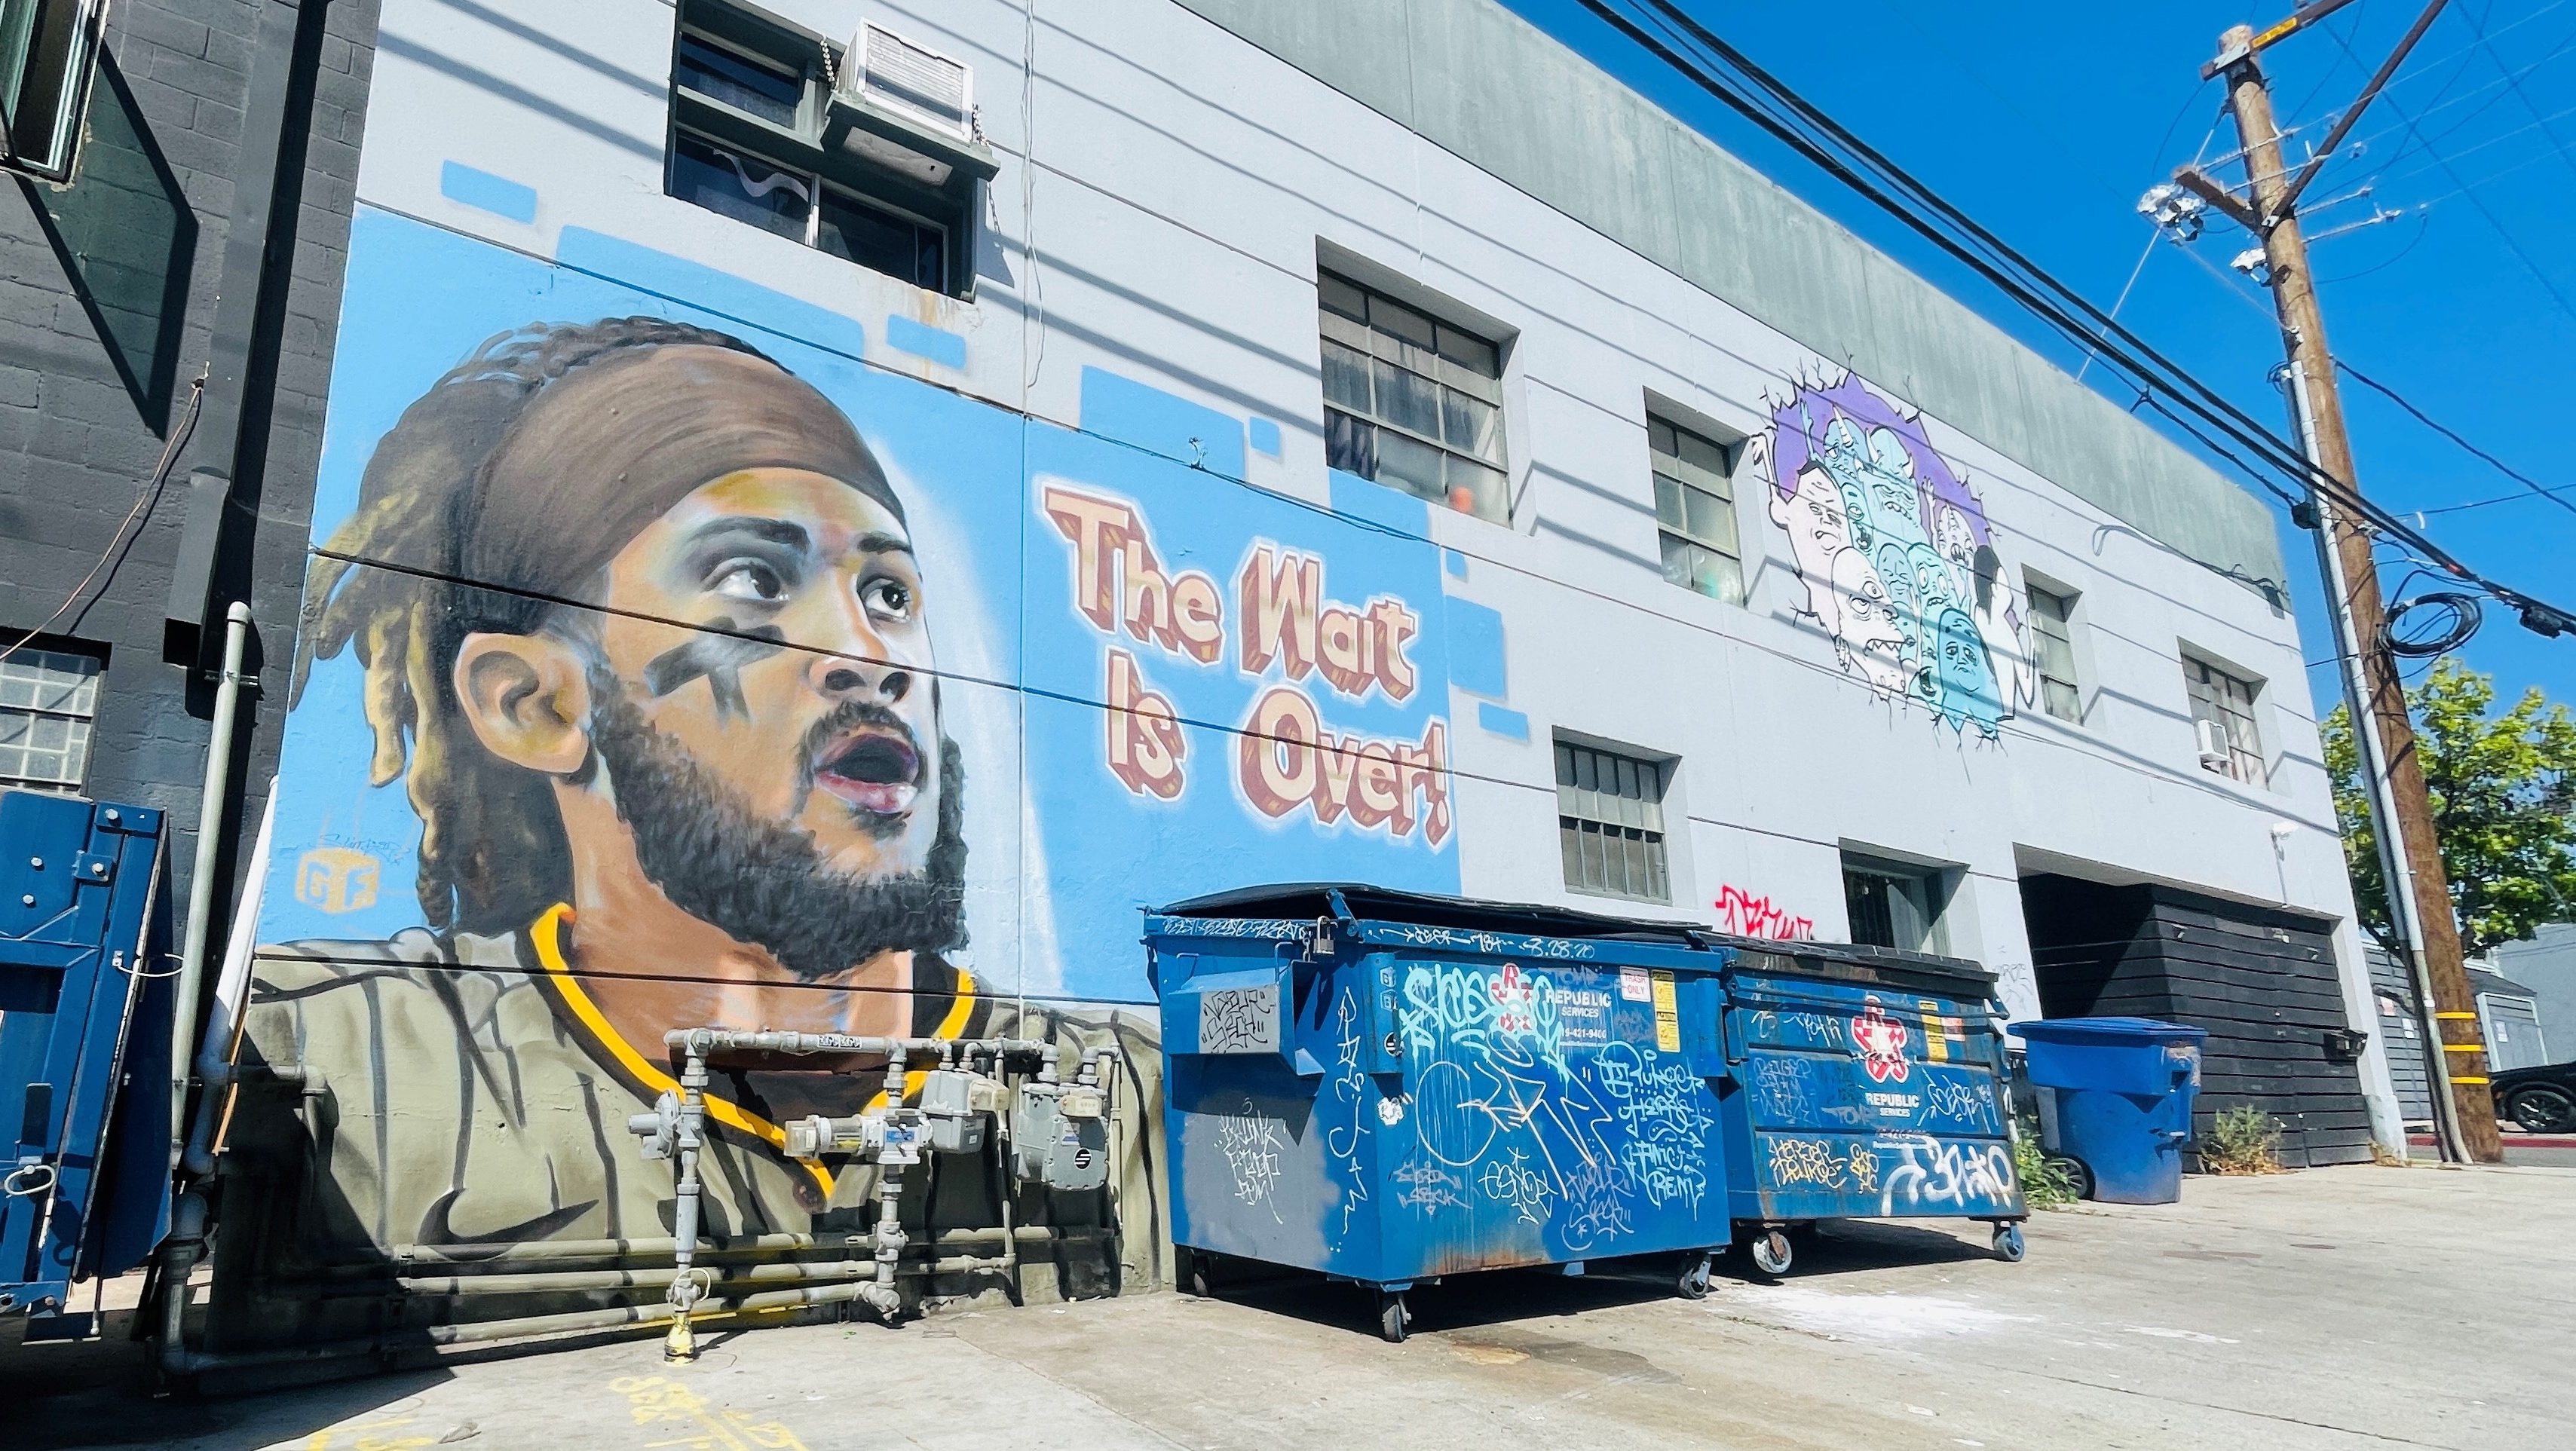 Tatis mural is latest in series of Padres artwork to come